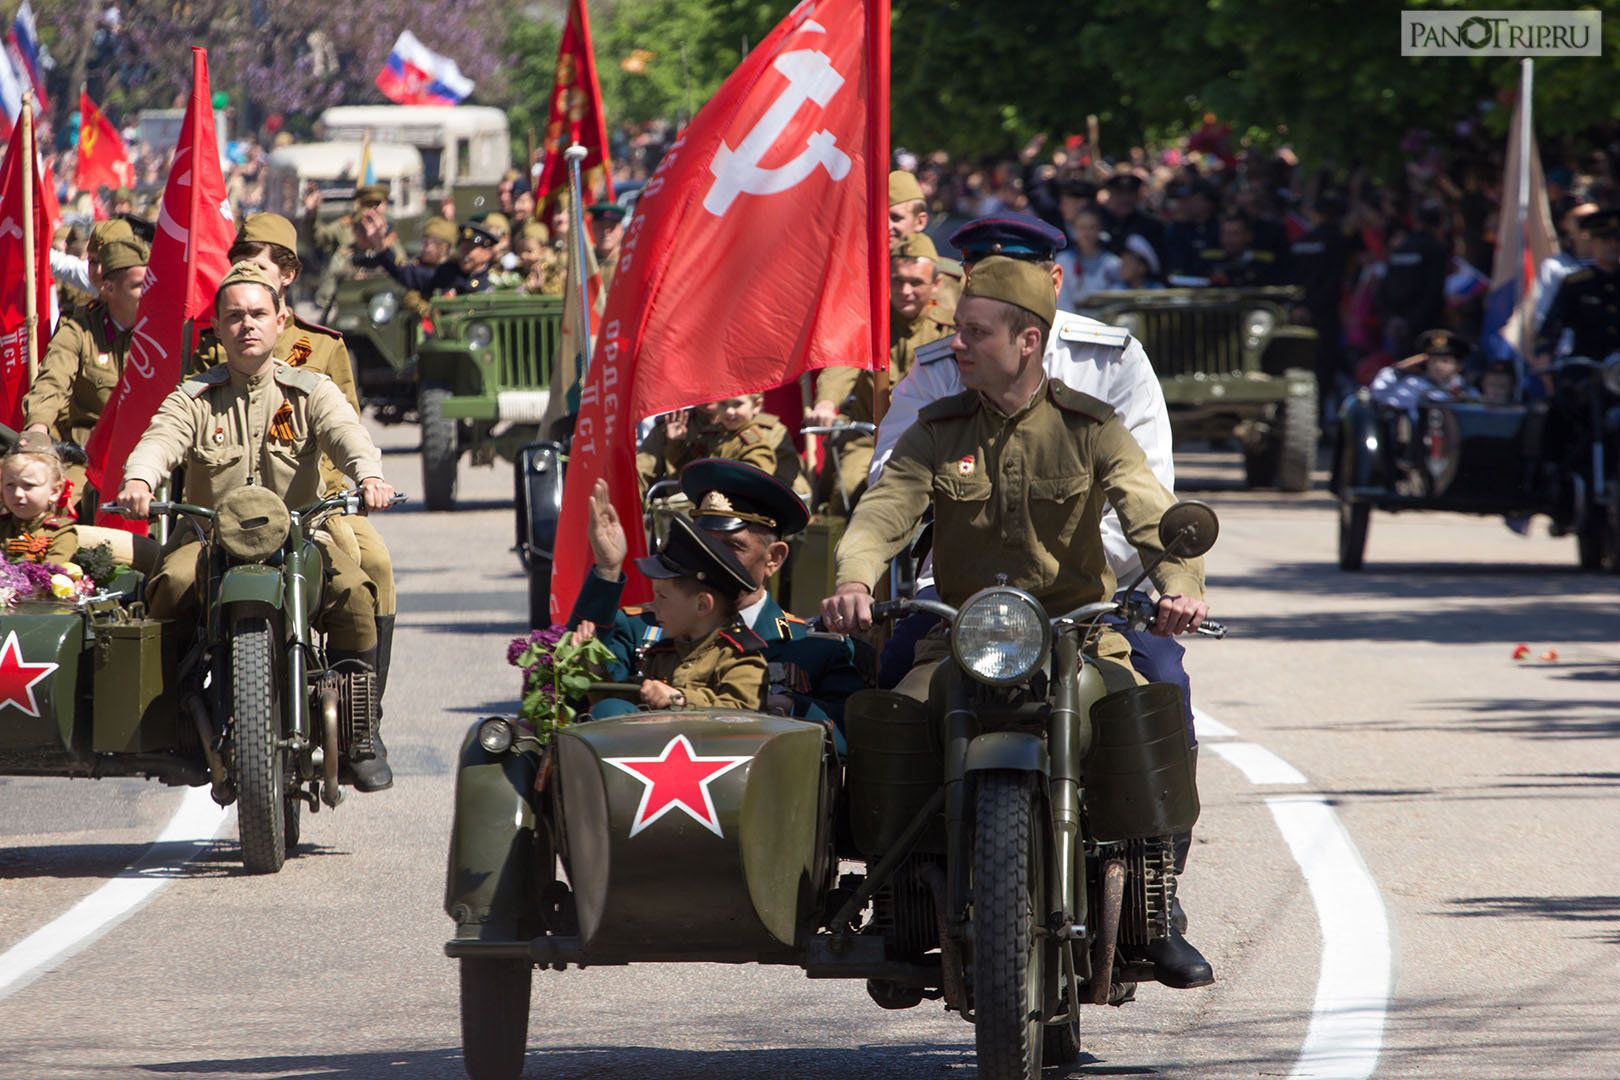 70-th Victory Day